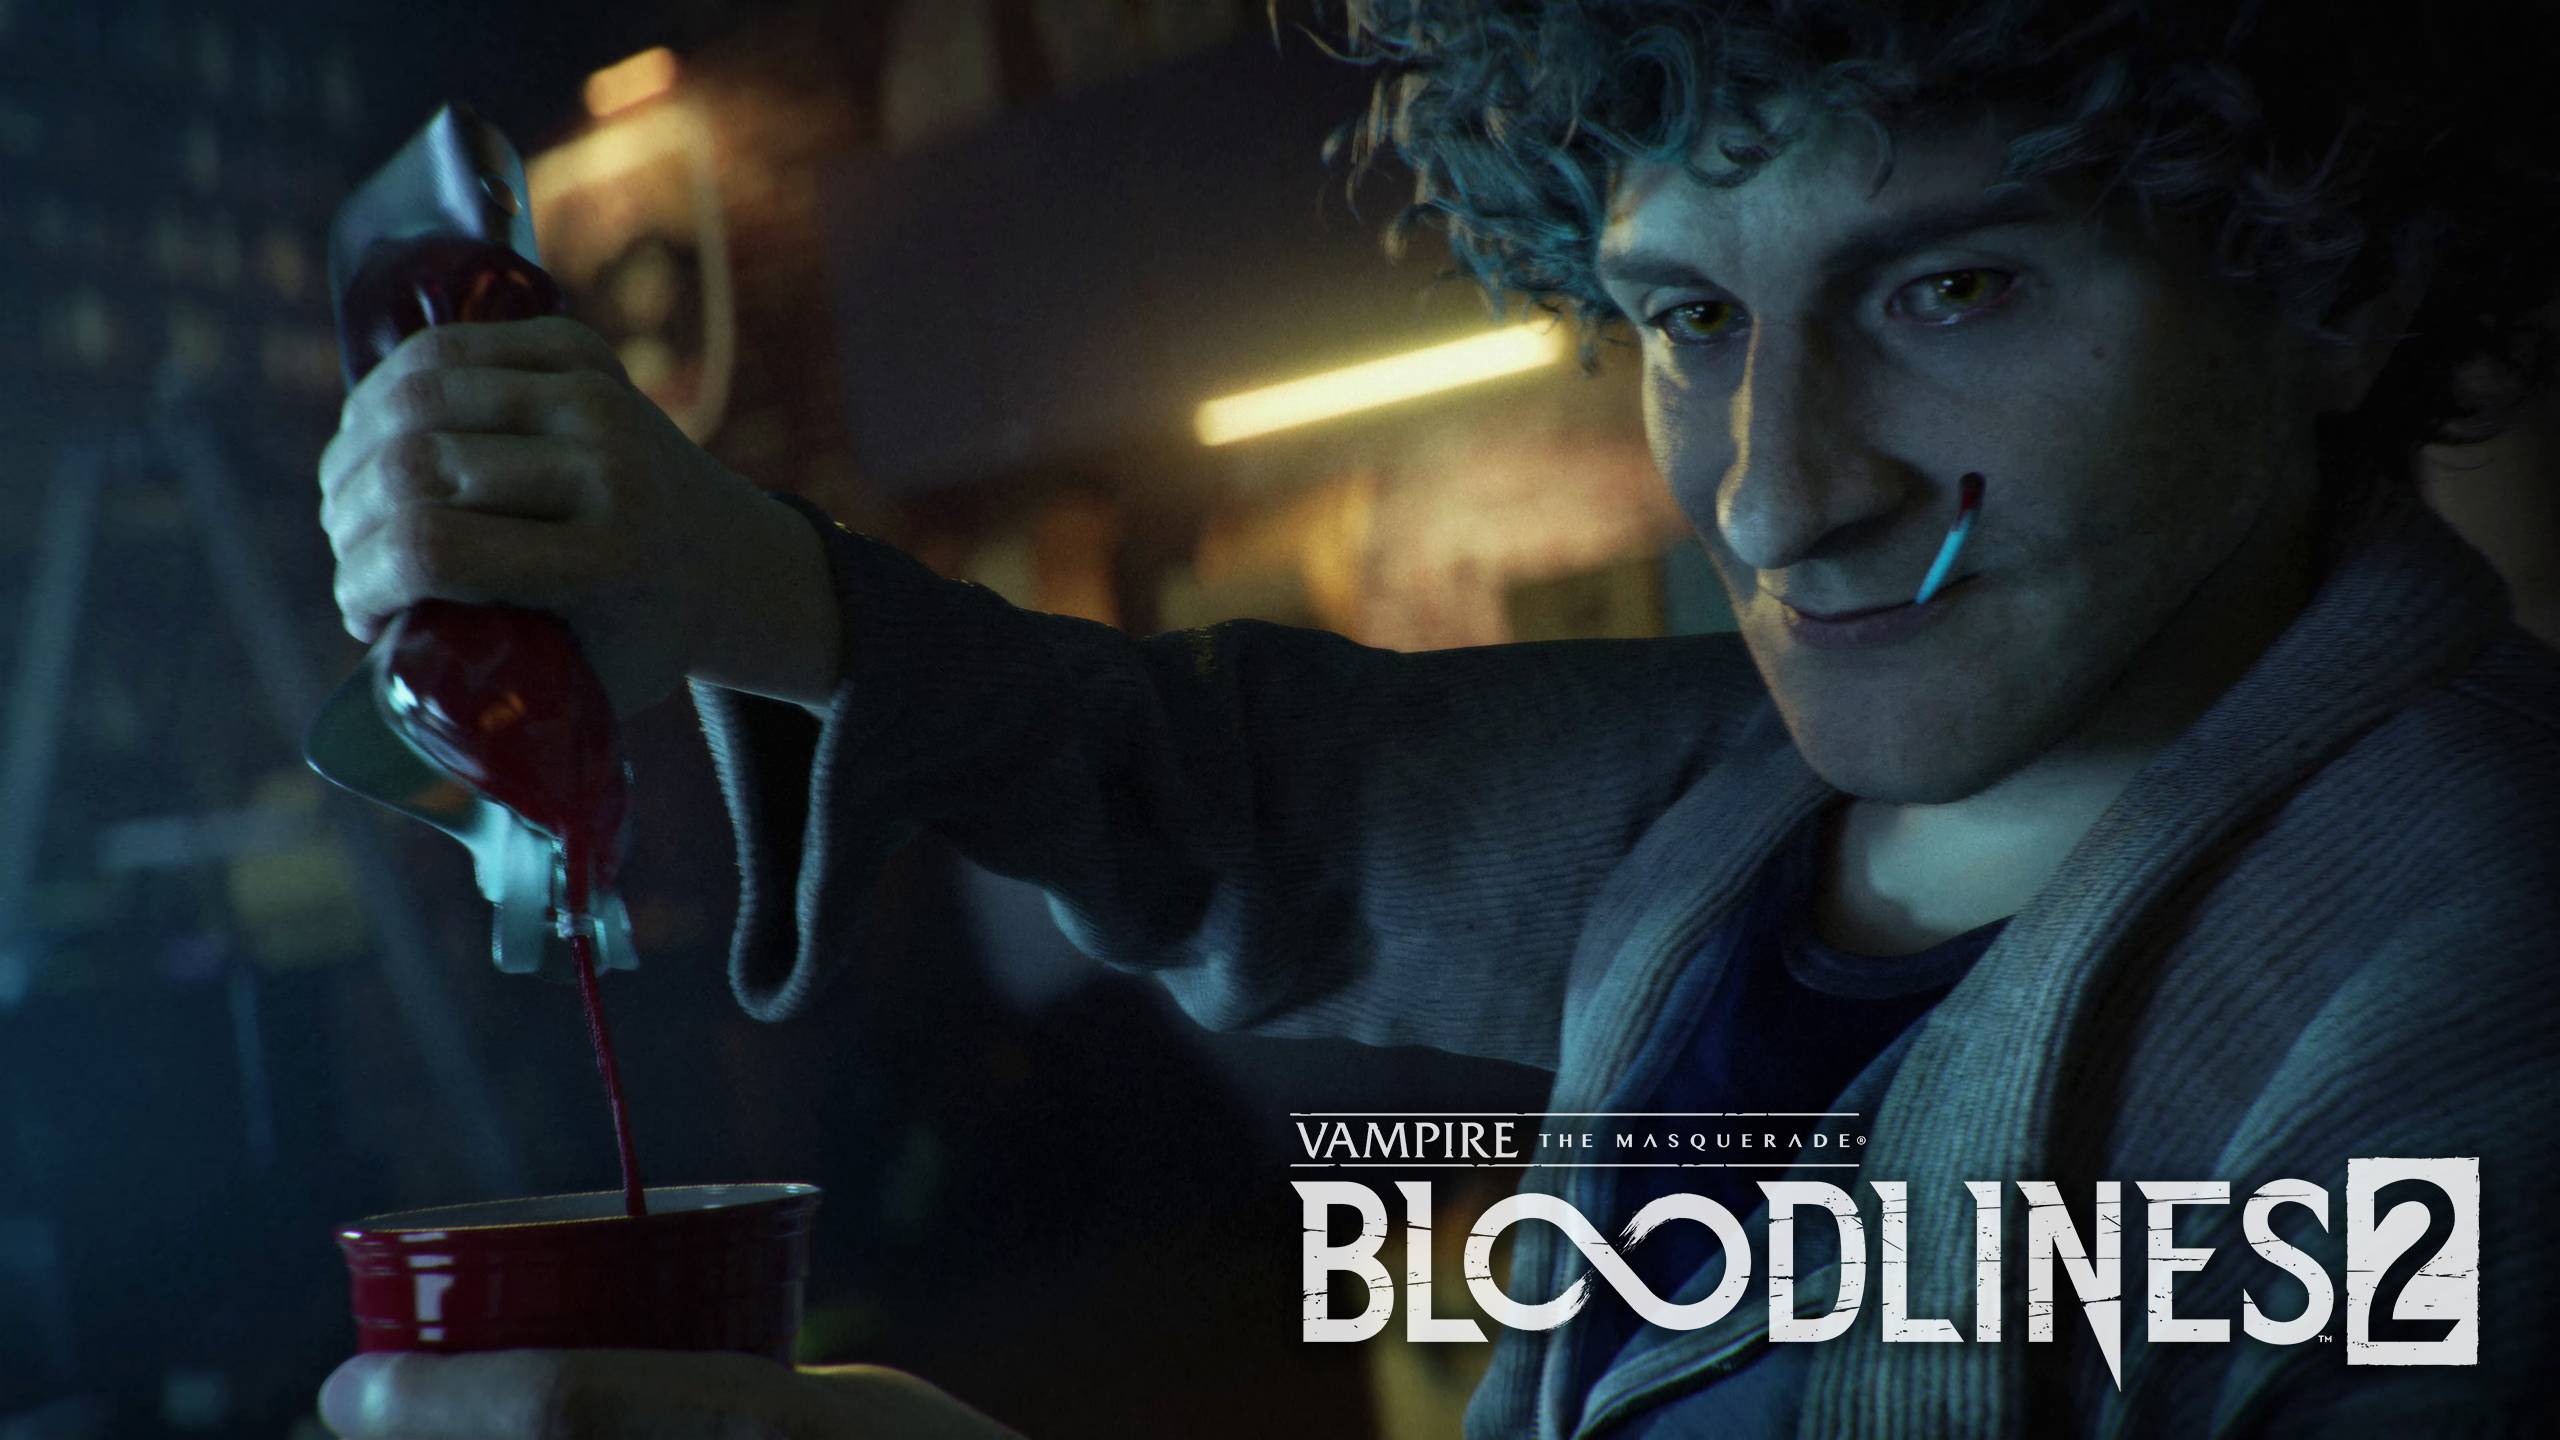 vampire the masquerade bloodlines 2 male vampire smoking pouring blood bag into a mug